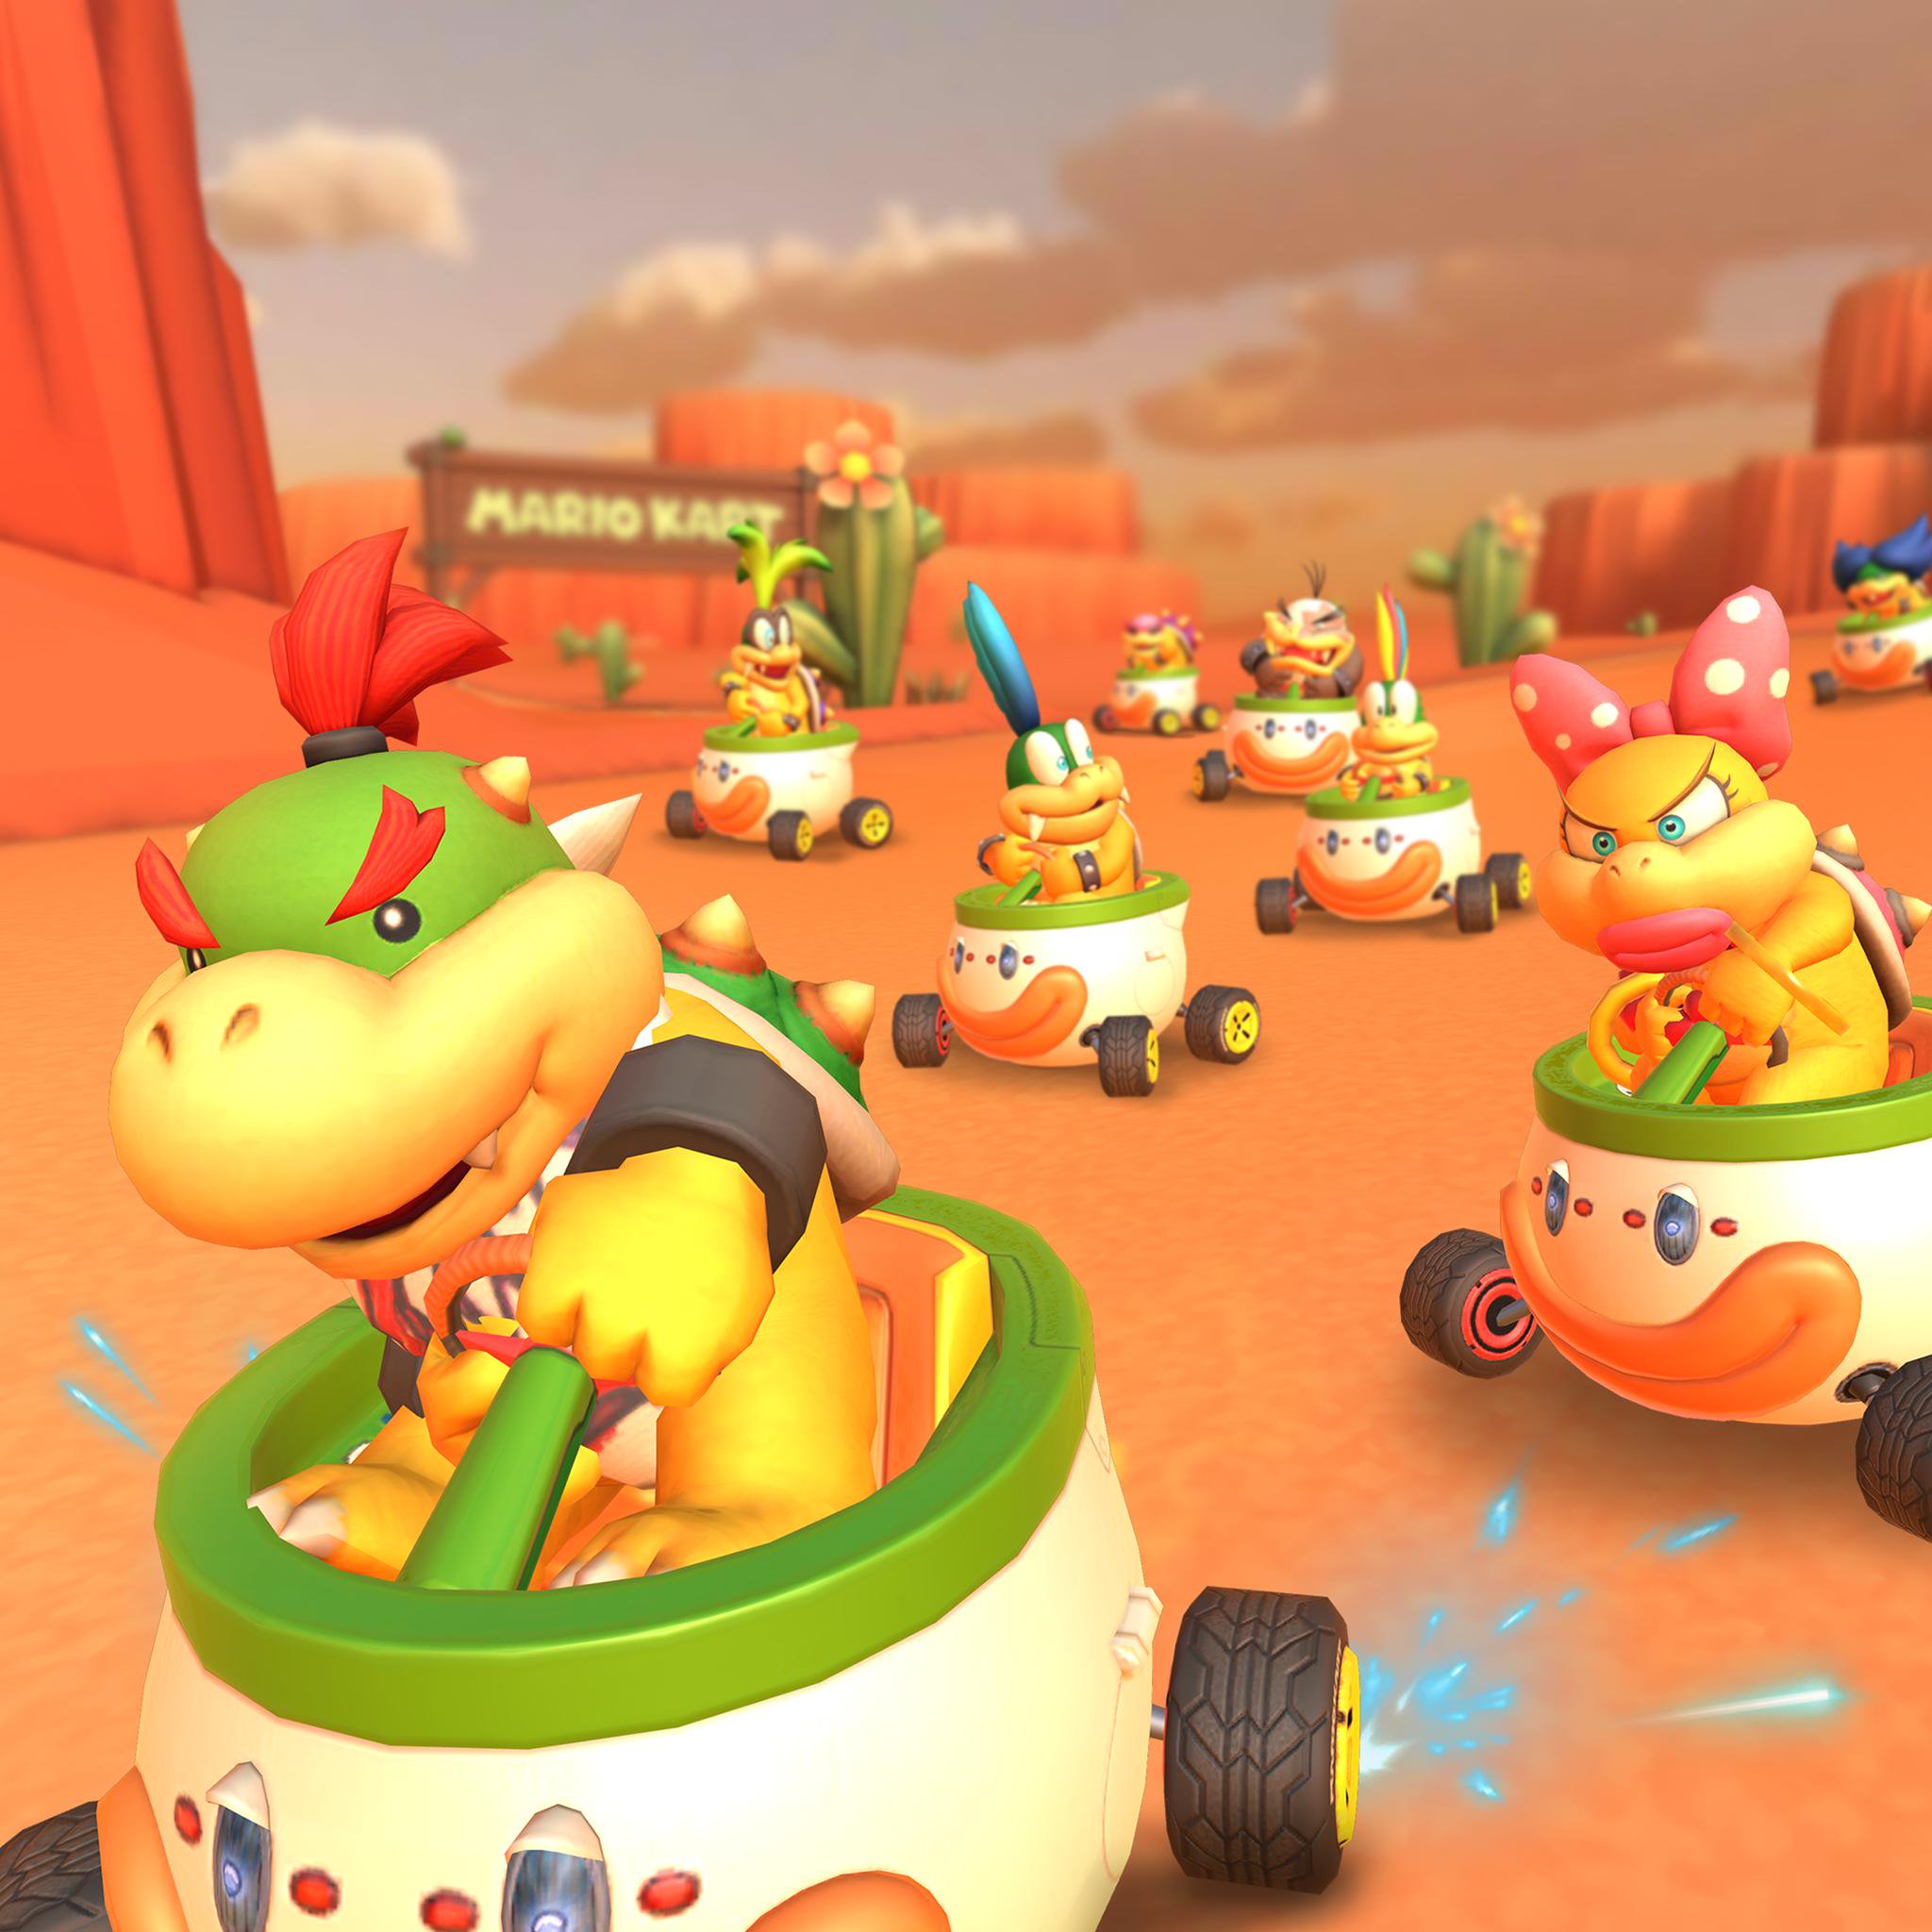 Tokyo Tour Event Now Live In Mario Kart Tour, Adds 14 New Characters And  More – NintendoSoup